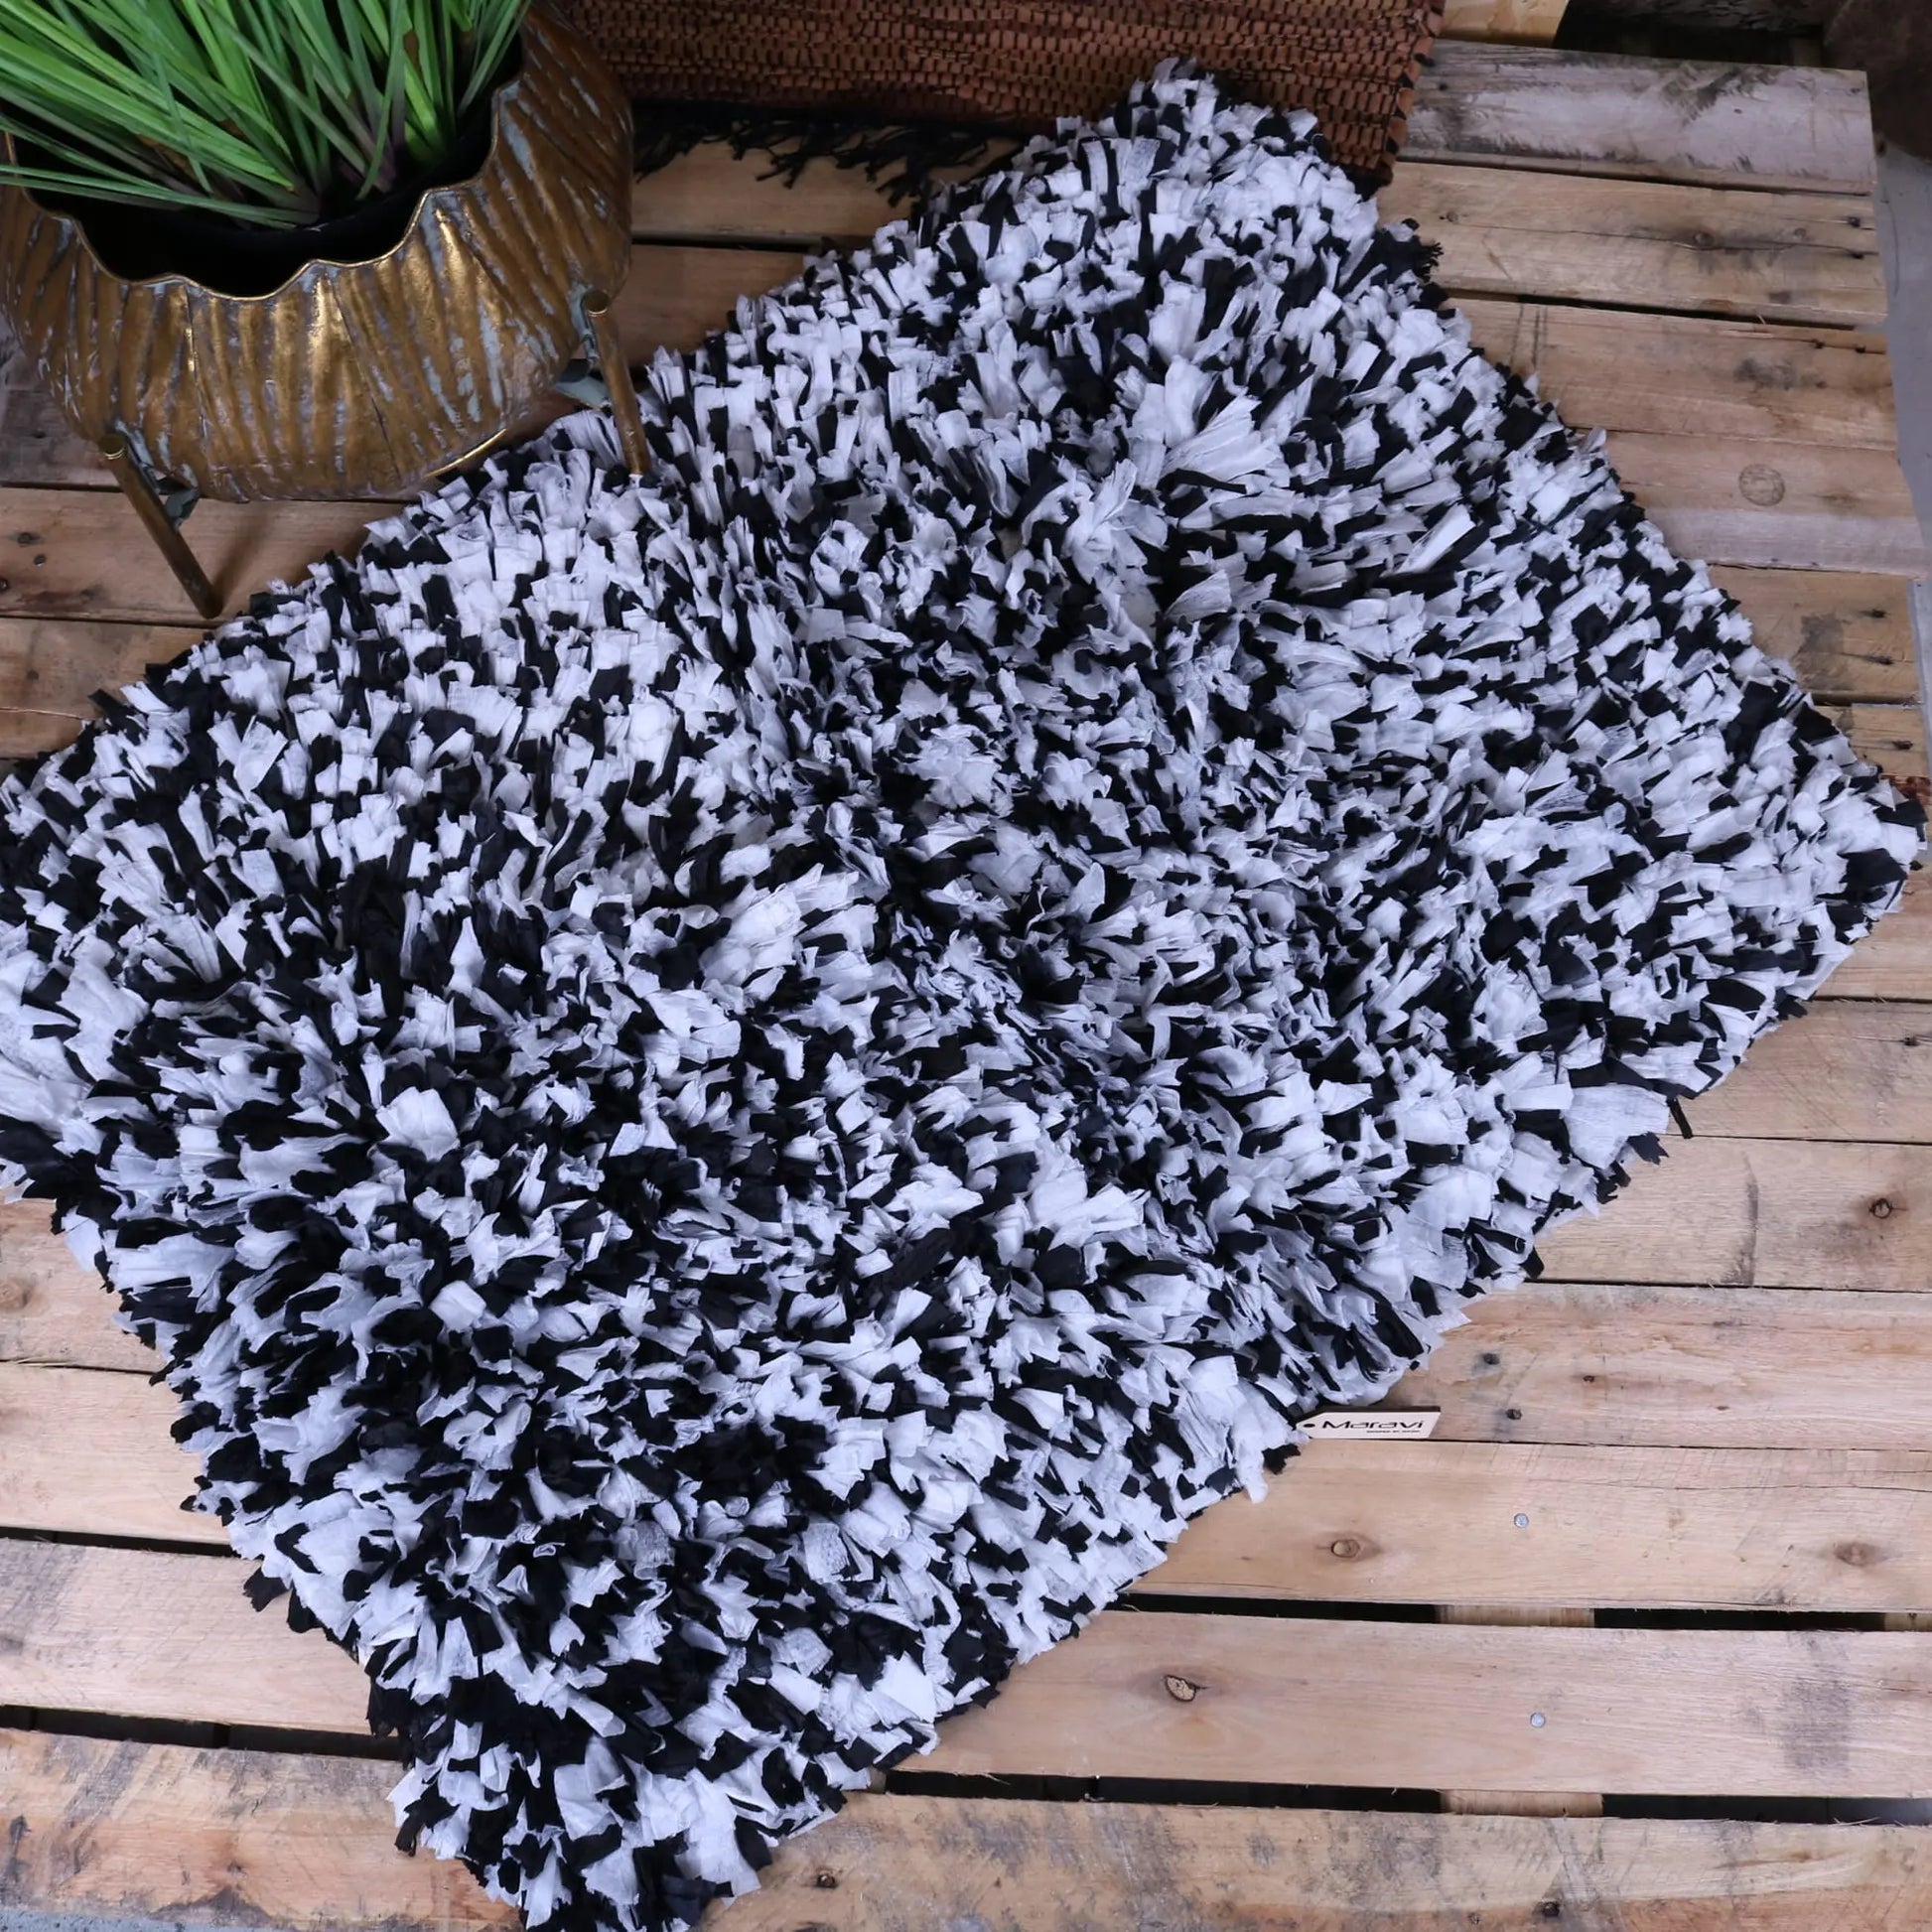 Varam Fluffy Recycled Rug Black and White - Top View